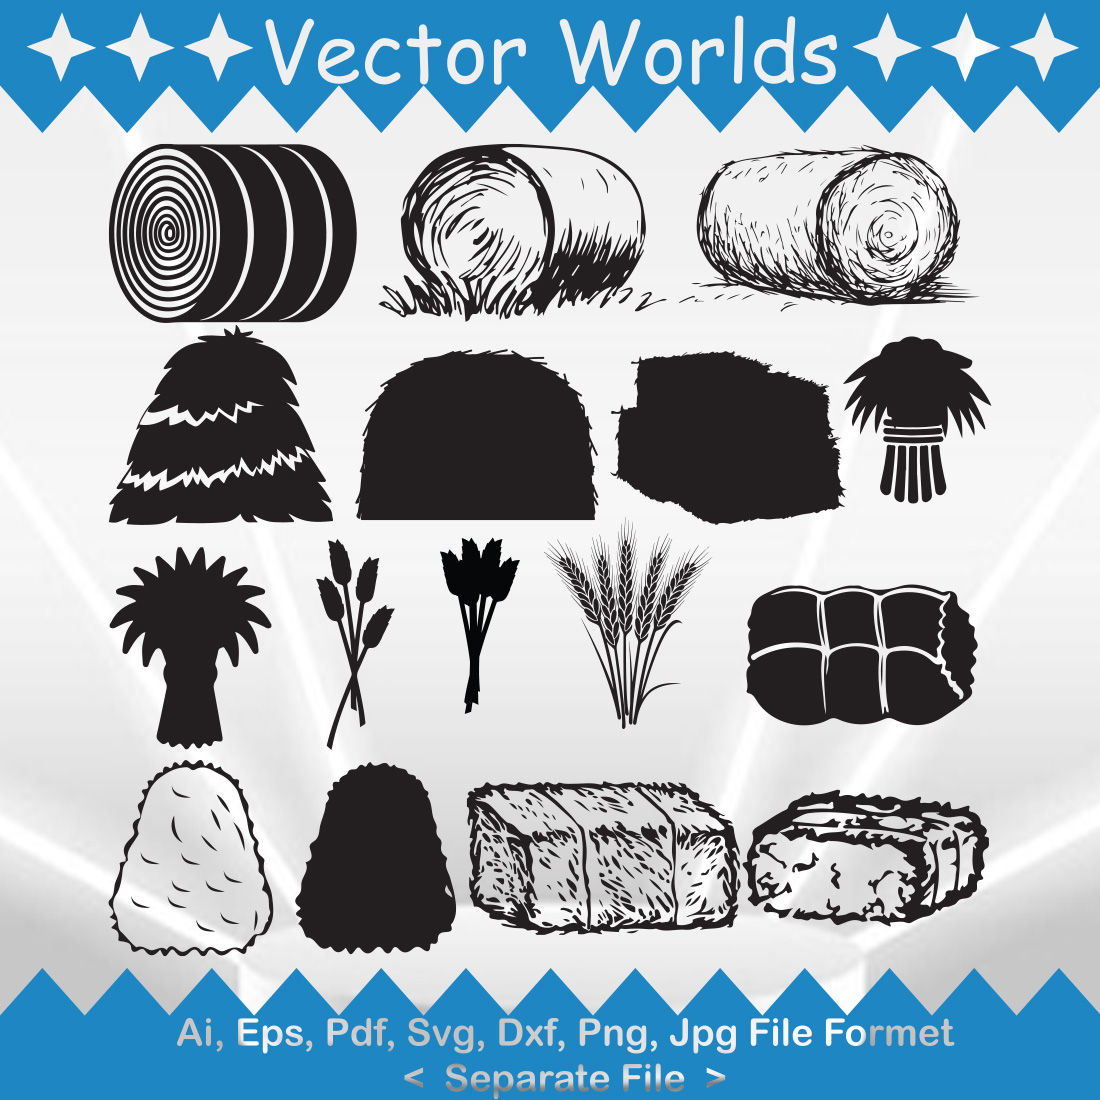 Hay SVG Vector Design cover image.